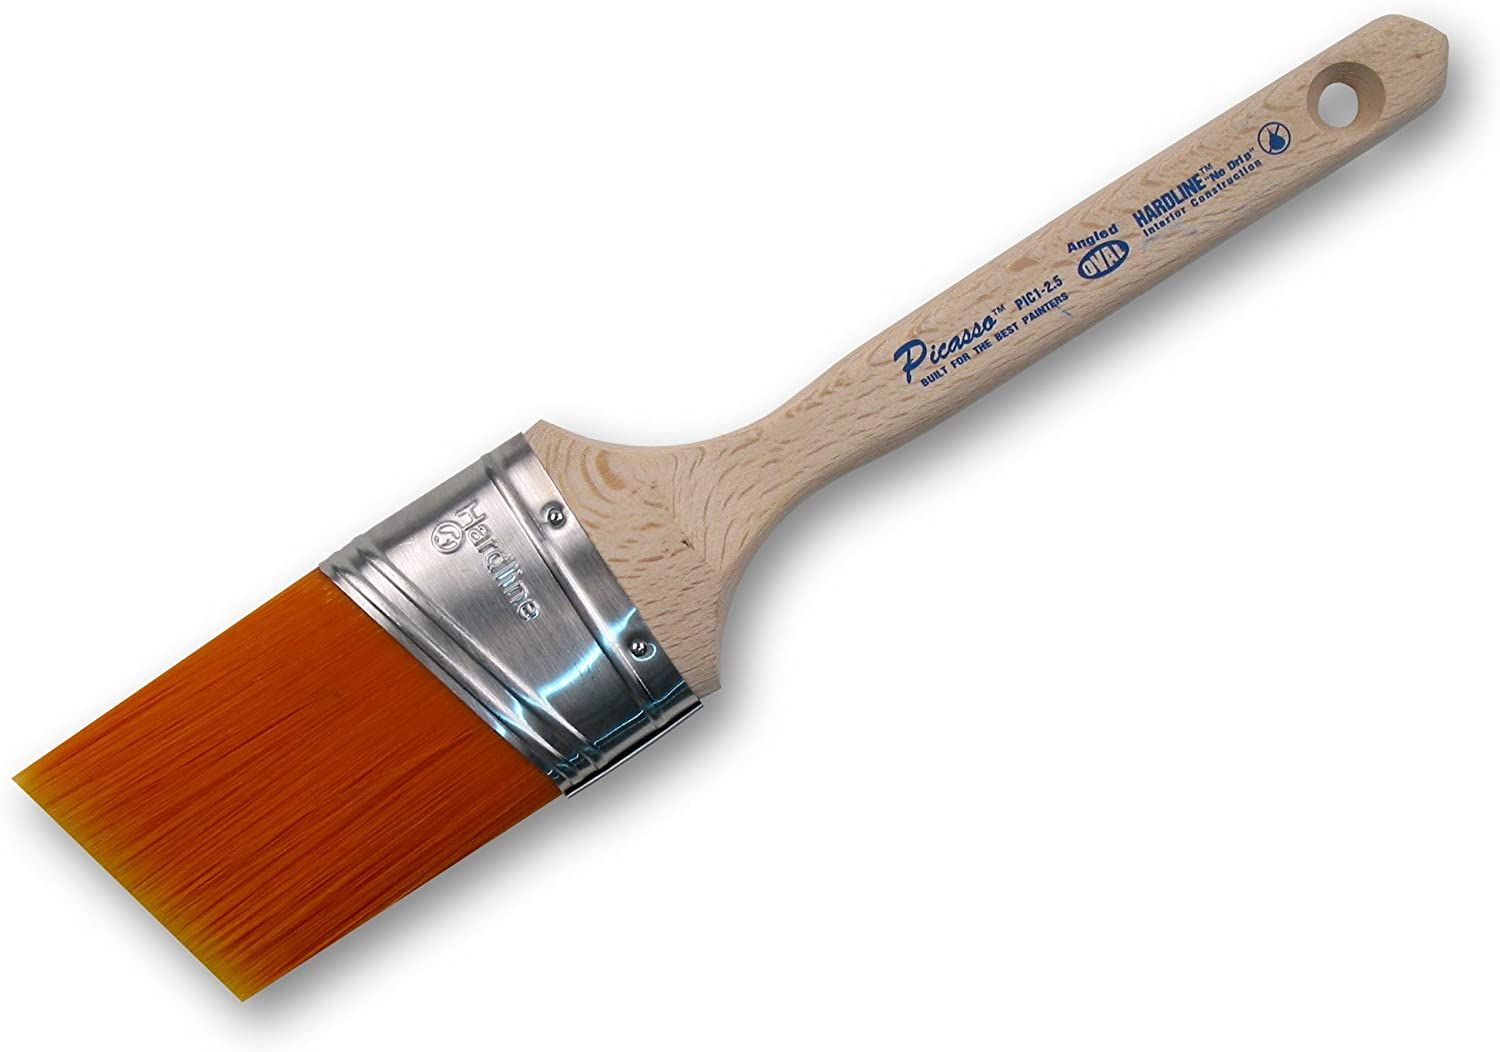 The Best Paint Brush For Cutting In Around Trim